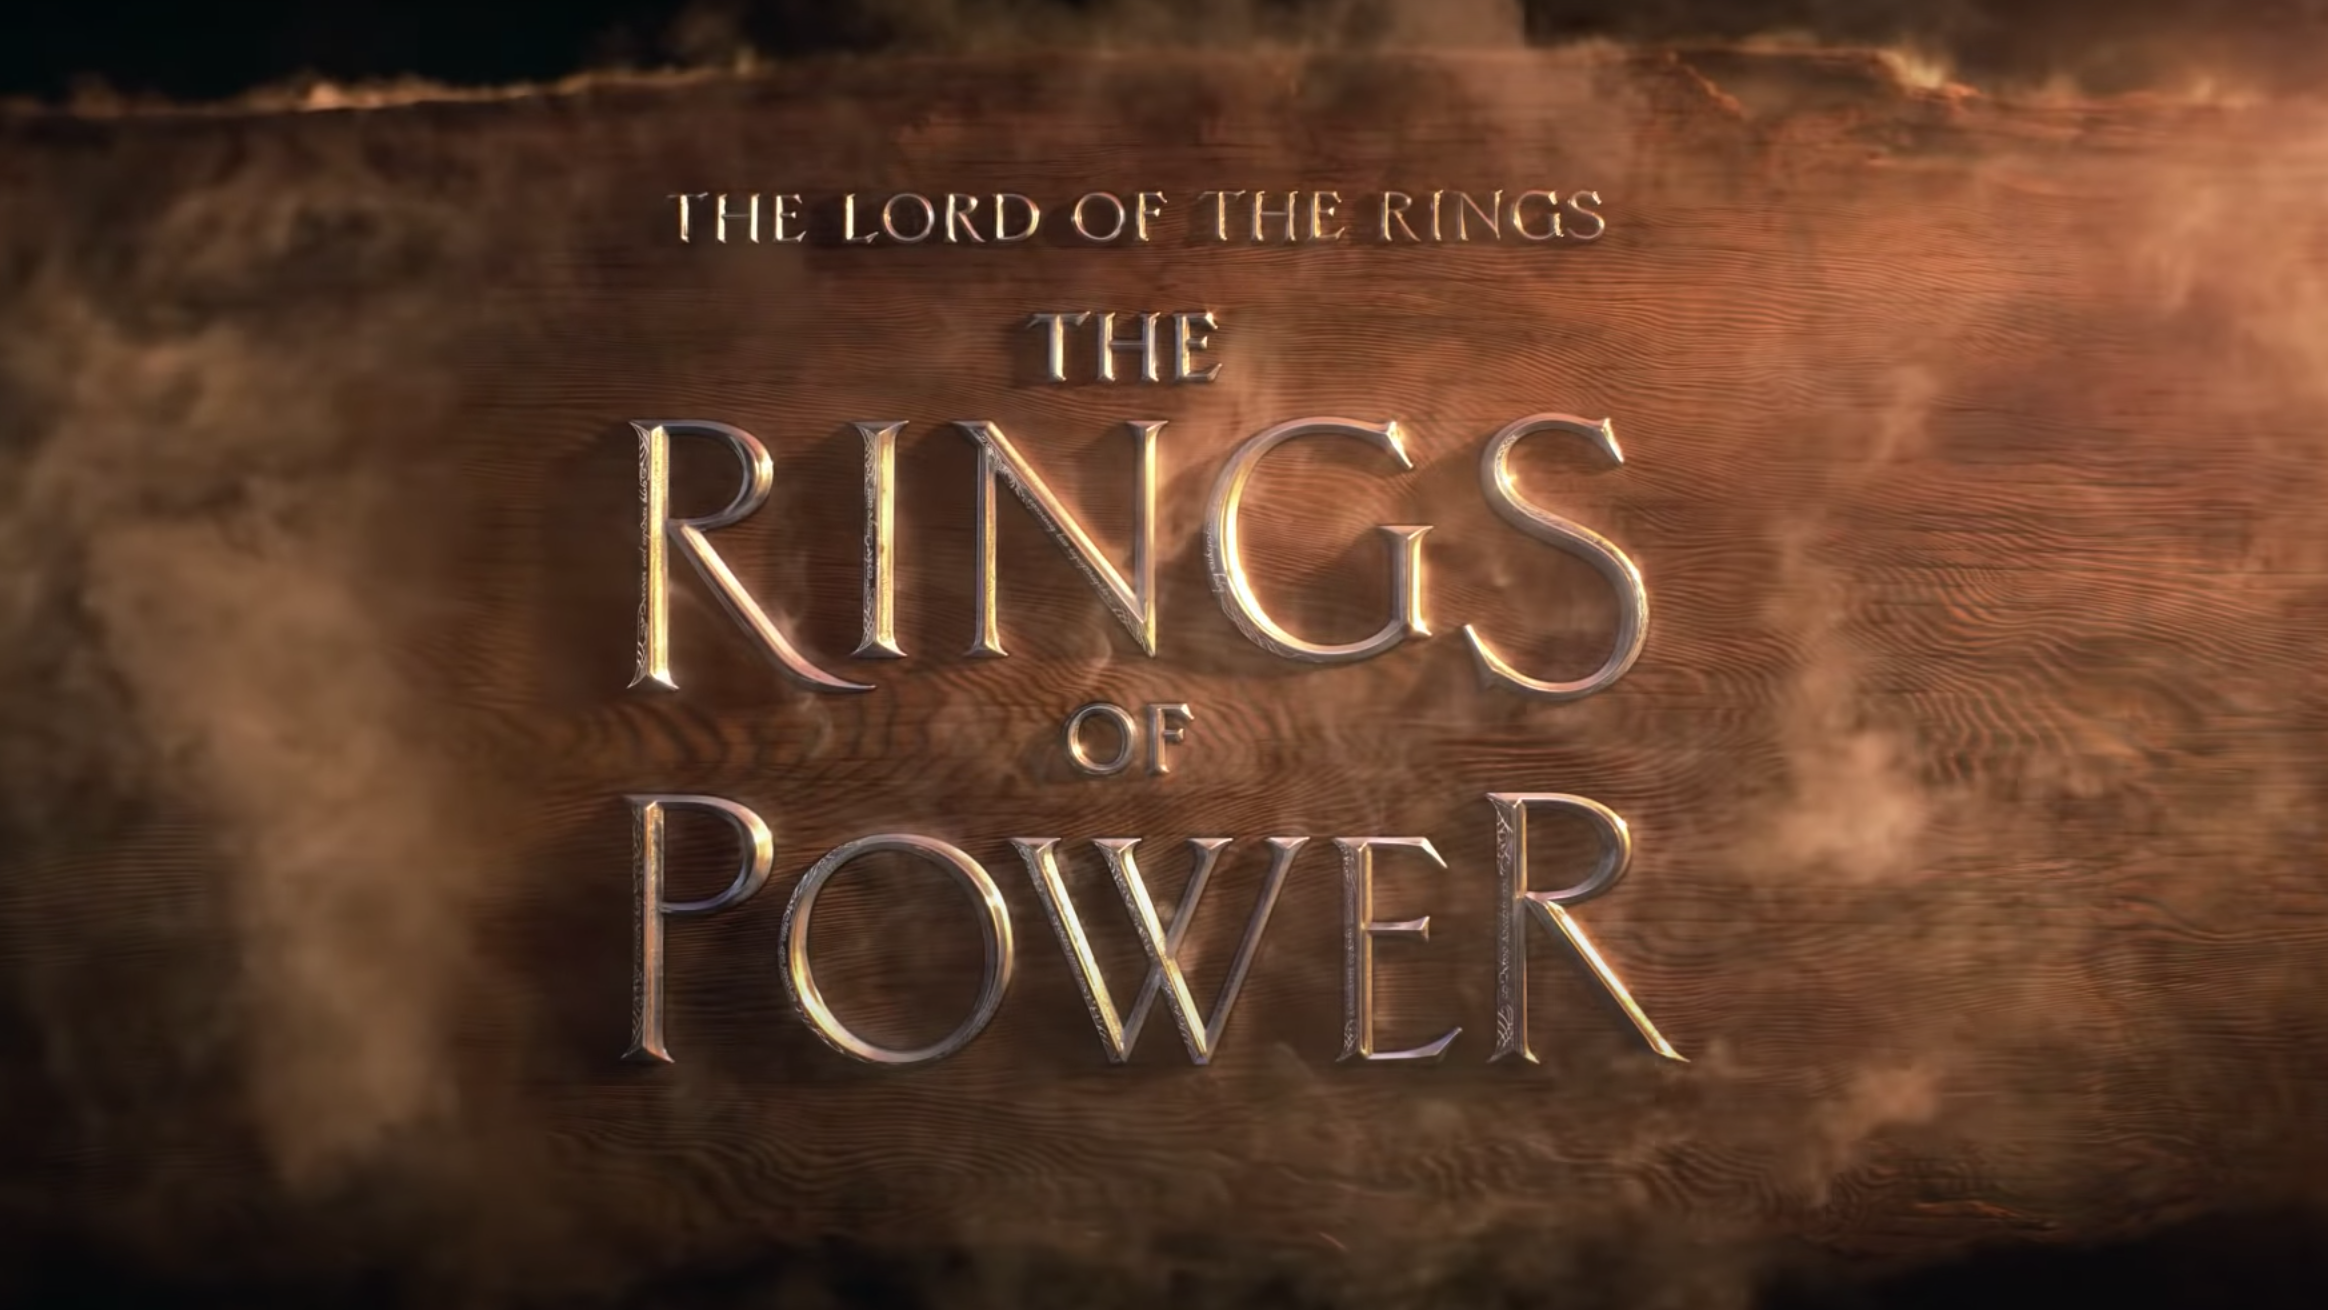 Amazon’s Lord Of The Rings show gets an official title